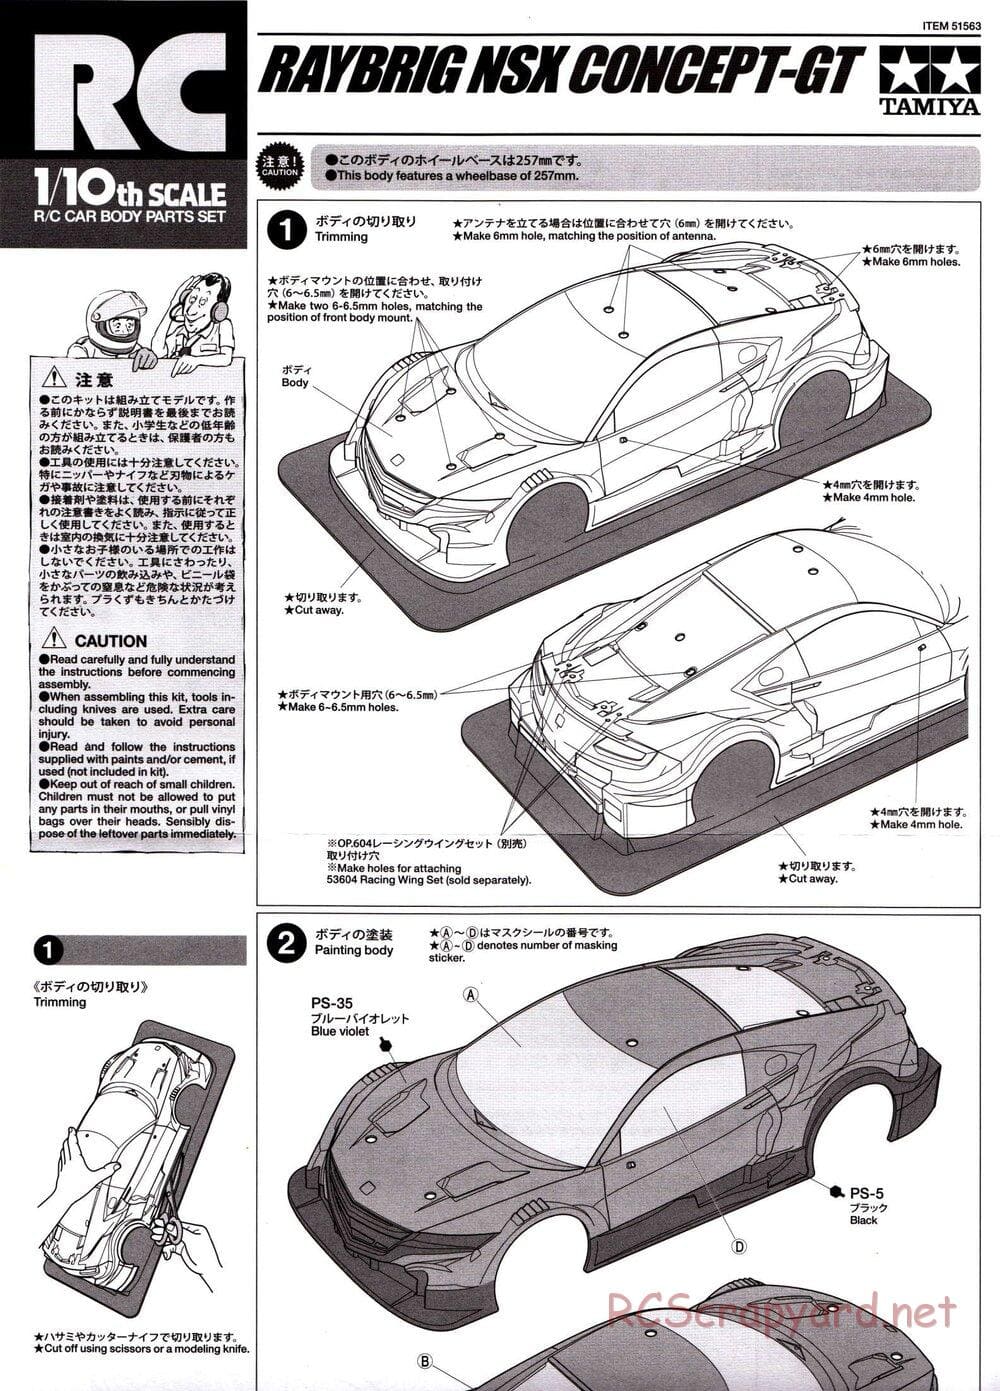 Tamiya - Raybrig NSX Concept-GT - TT-02 Chassis - Body Manual - Page 1